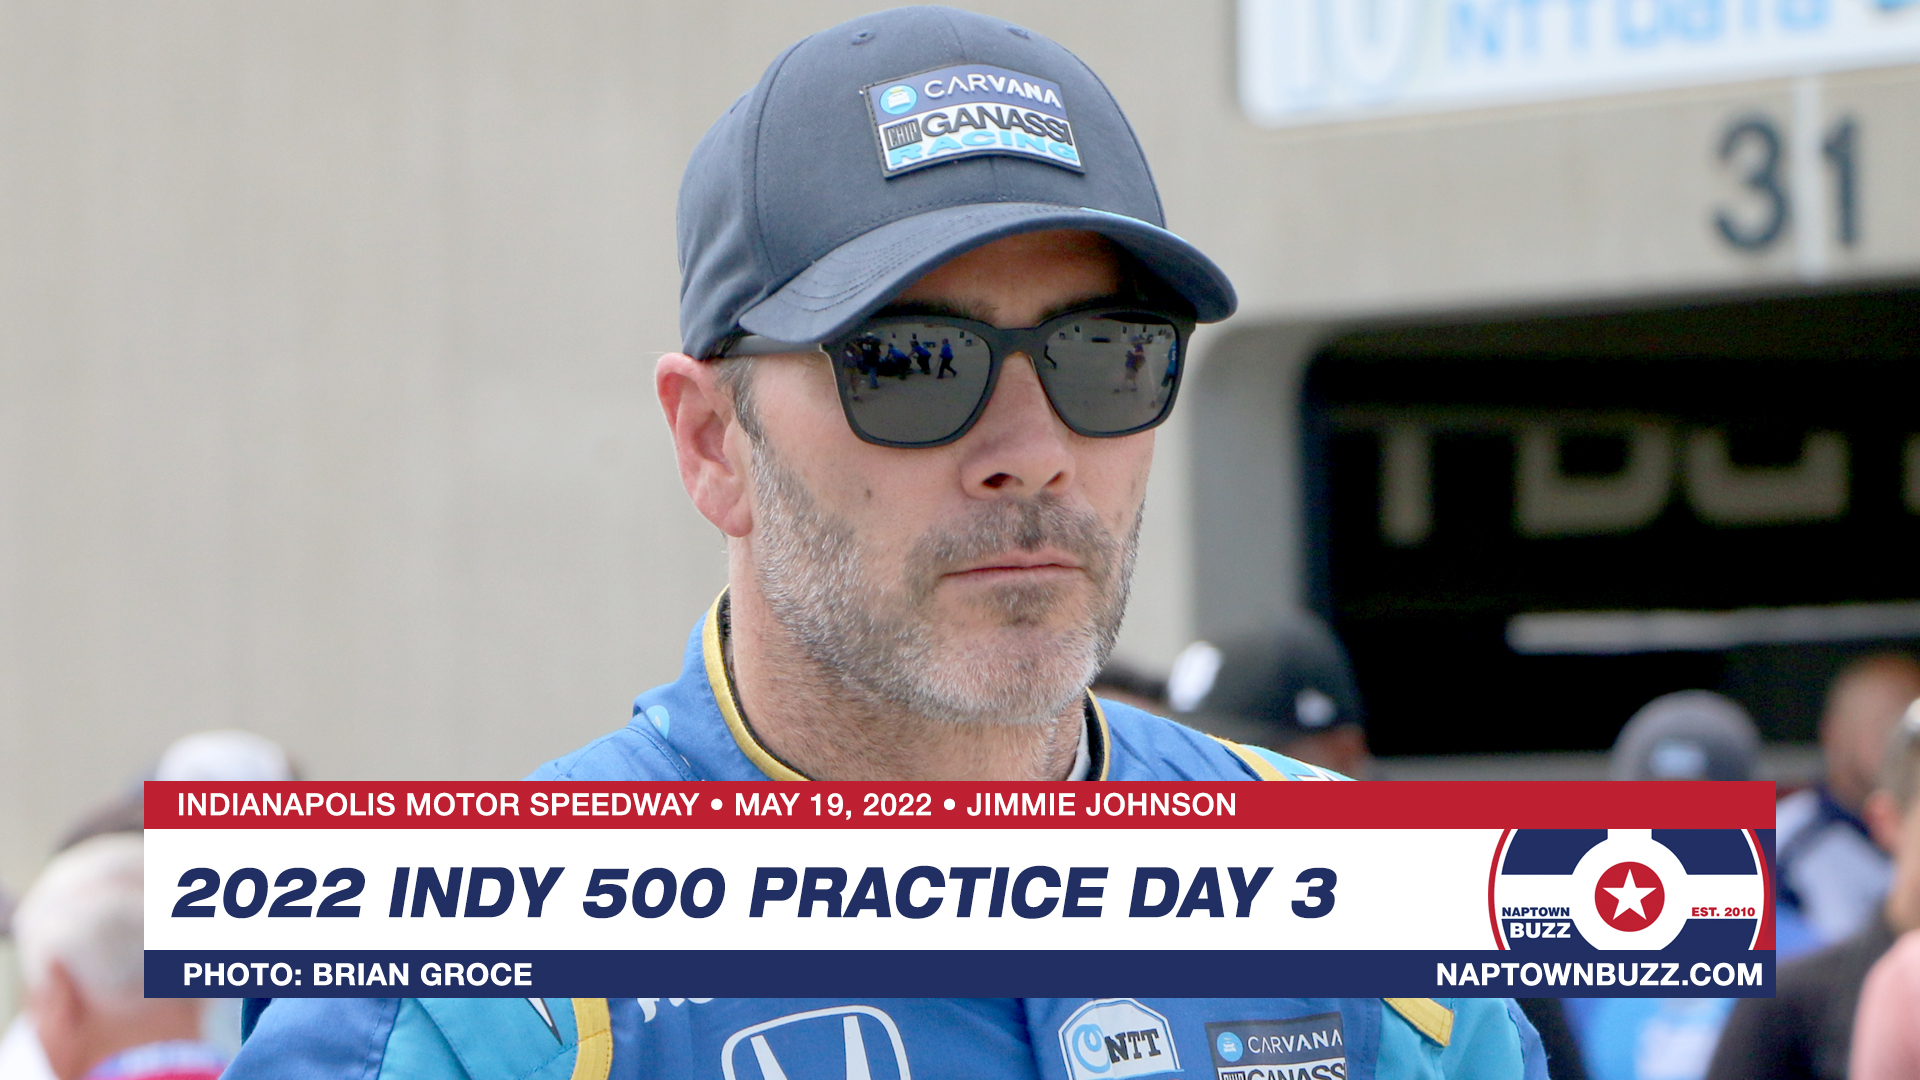 Jimmie Johnson on Indy 500 Practice Day 3 at Indianapolis Motor Speedway on May 19, 2022